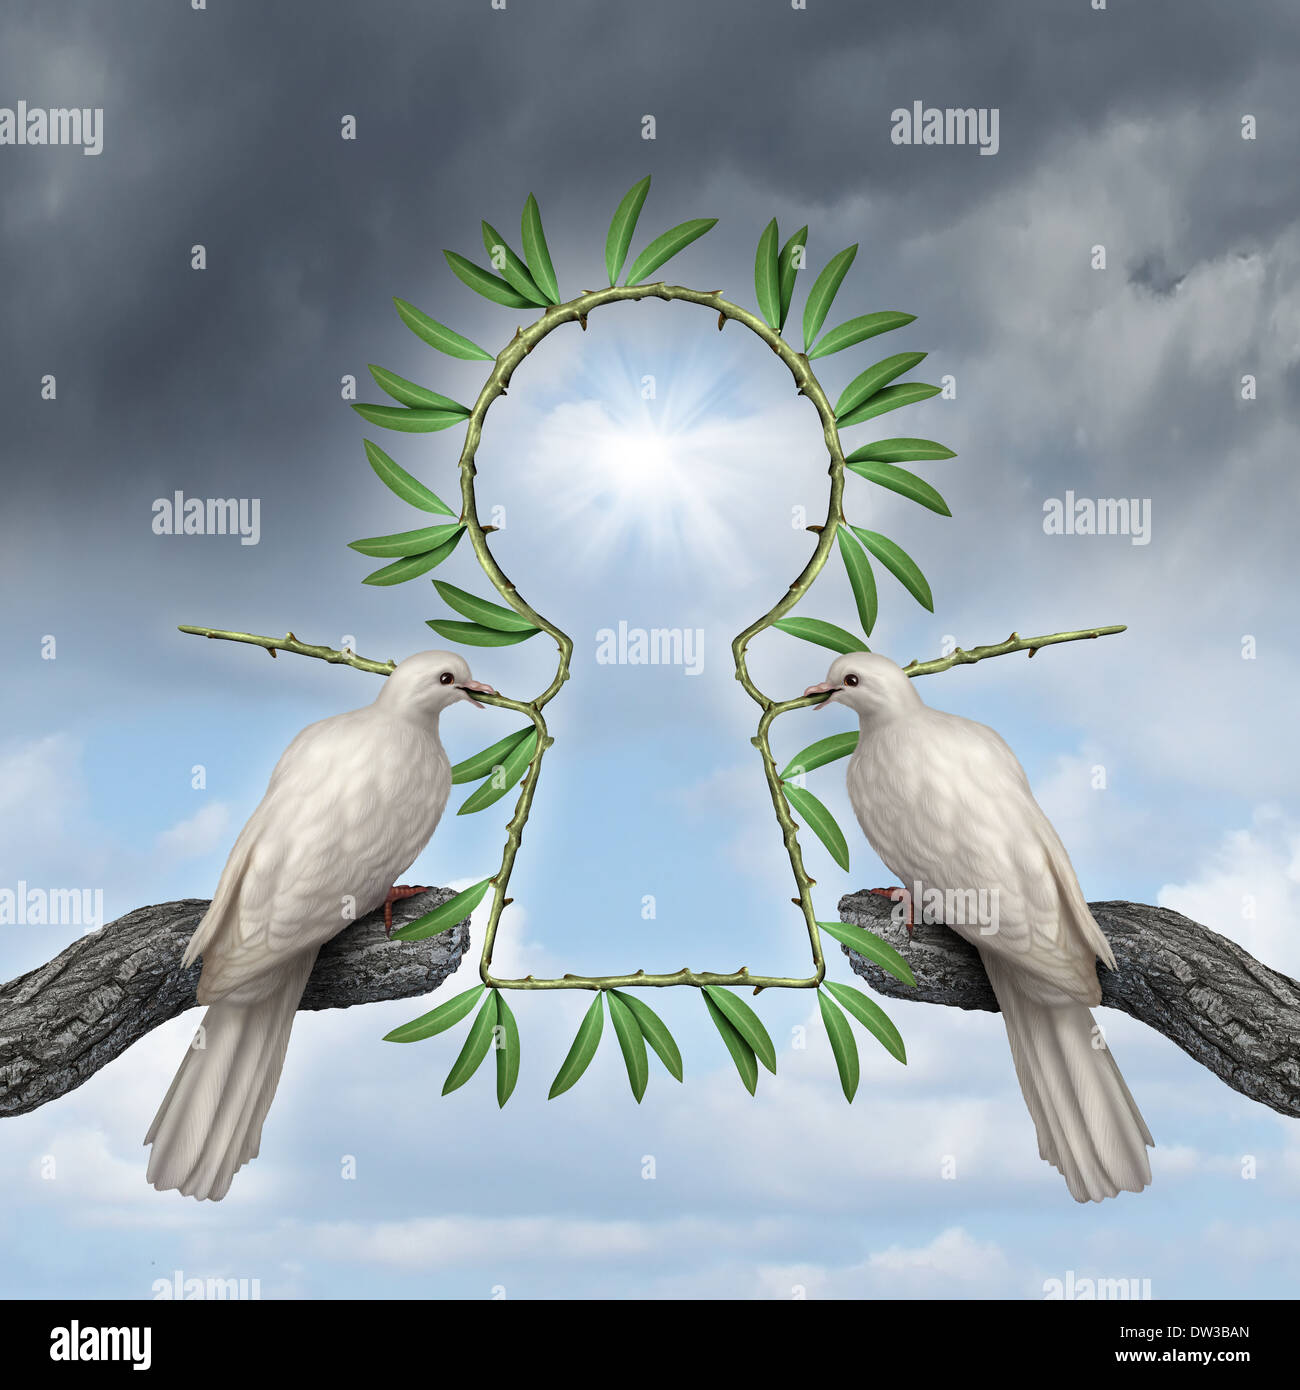 Key to peace symbol as two white doves coming together with a reconciliatiation solution with olive branches that are in the shape of a keyhole as a metaphor for friendship resolution and alternative to war. Stock Photo